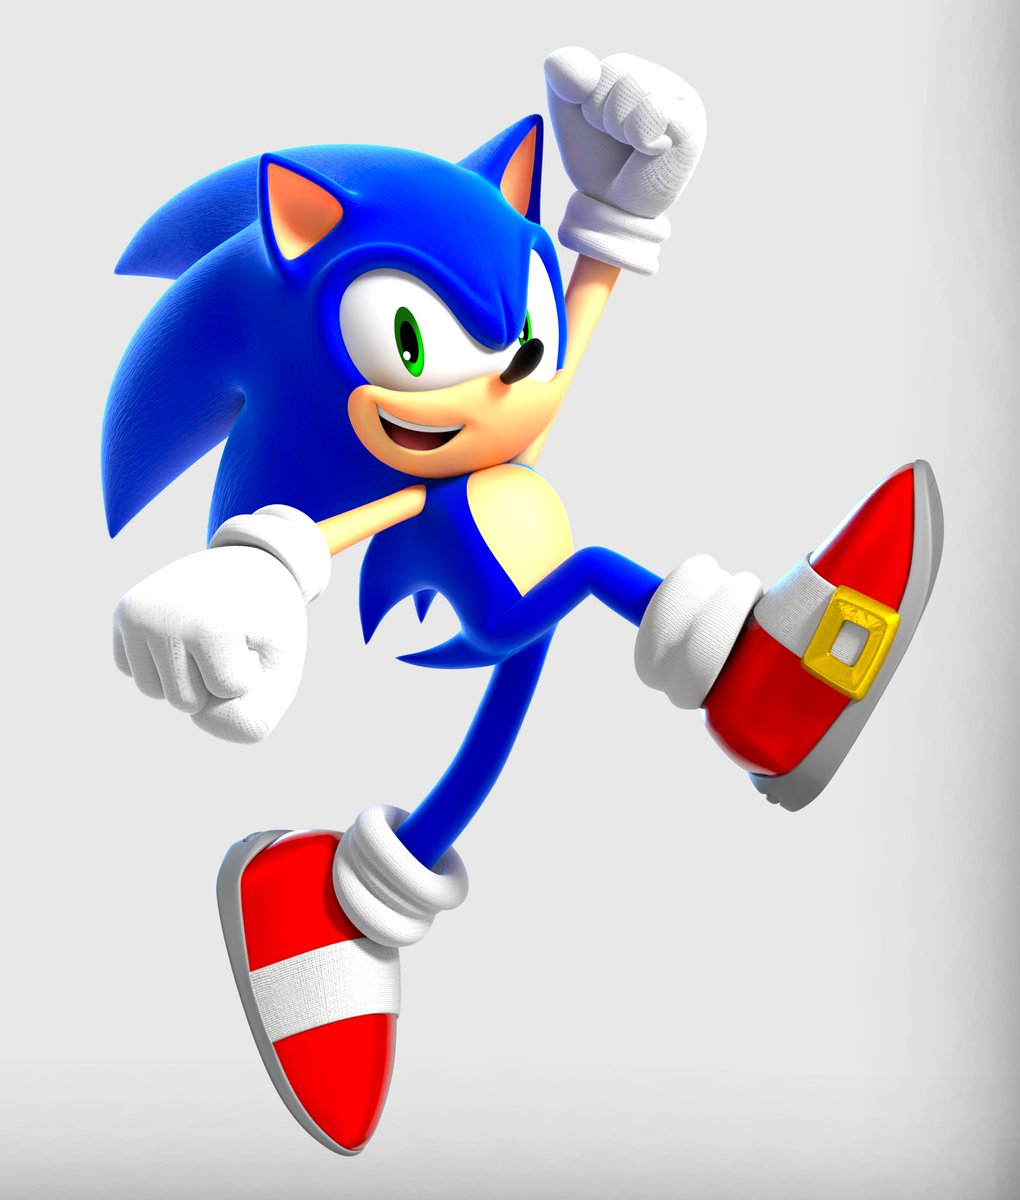 RT @NooB_B3D: Alright here's a reversal

Sonic doing Mario pose https://t.co/zimD5rX9iT